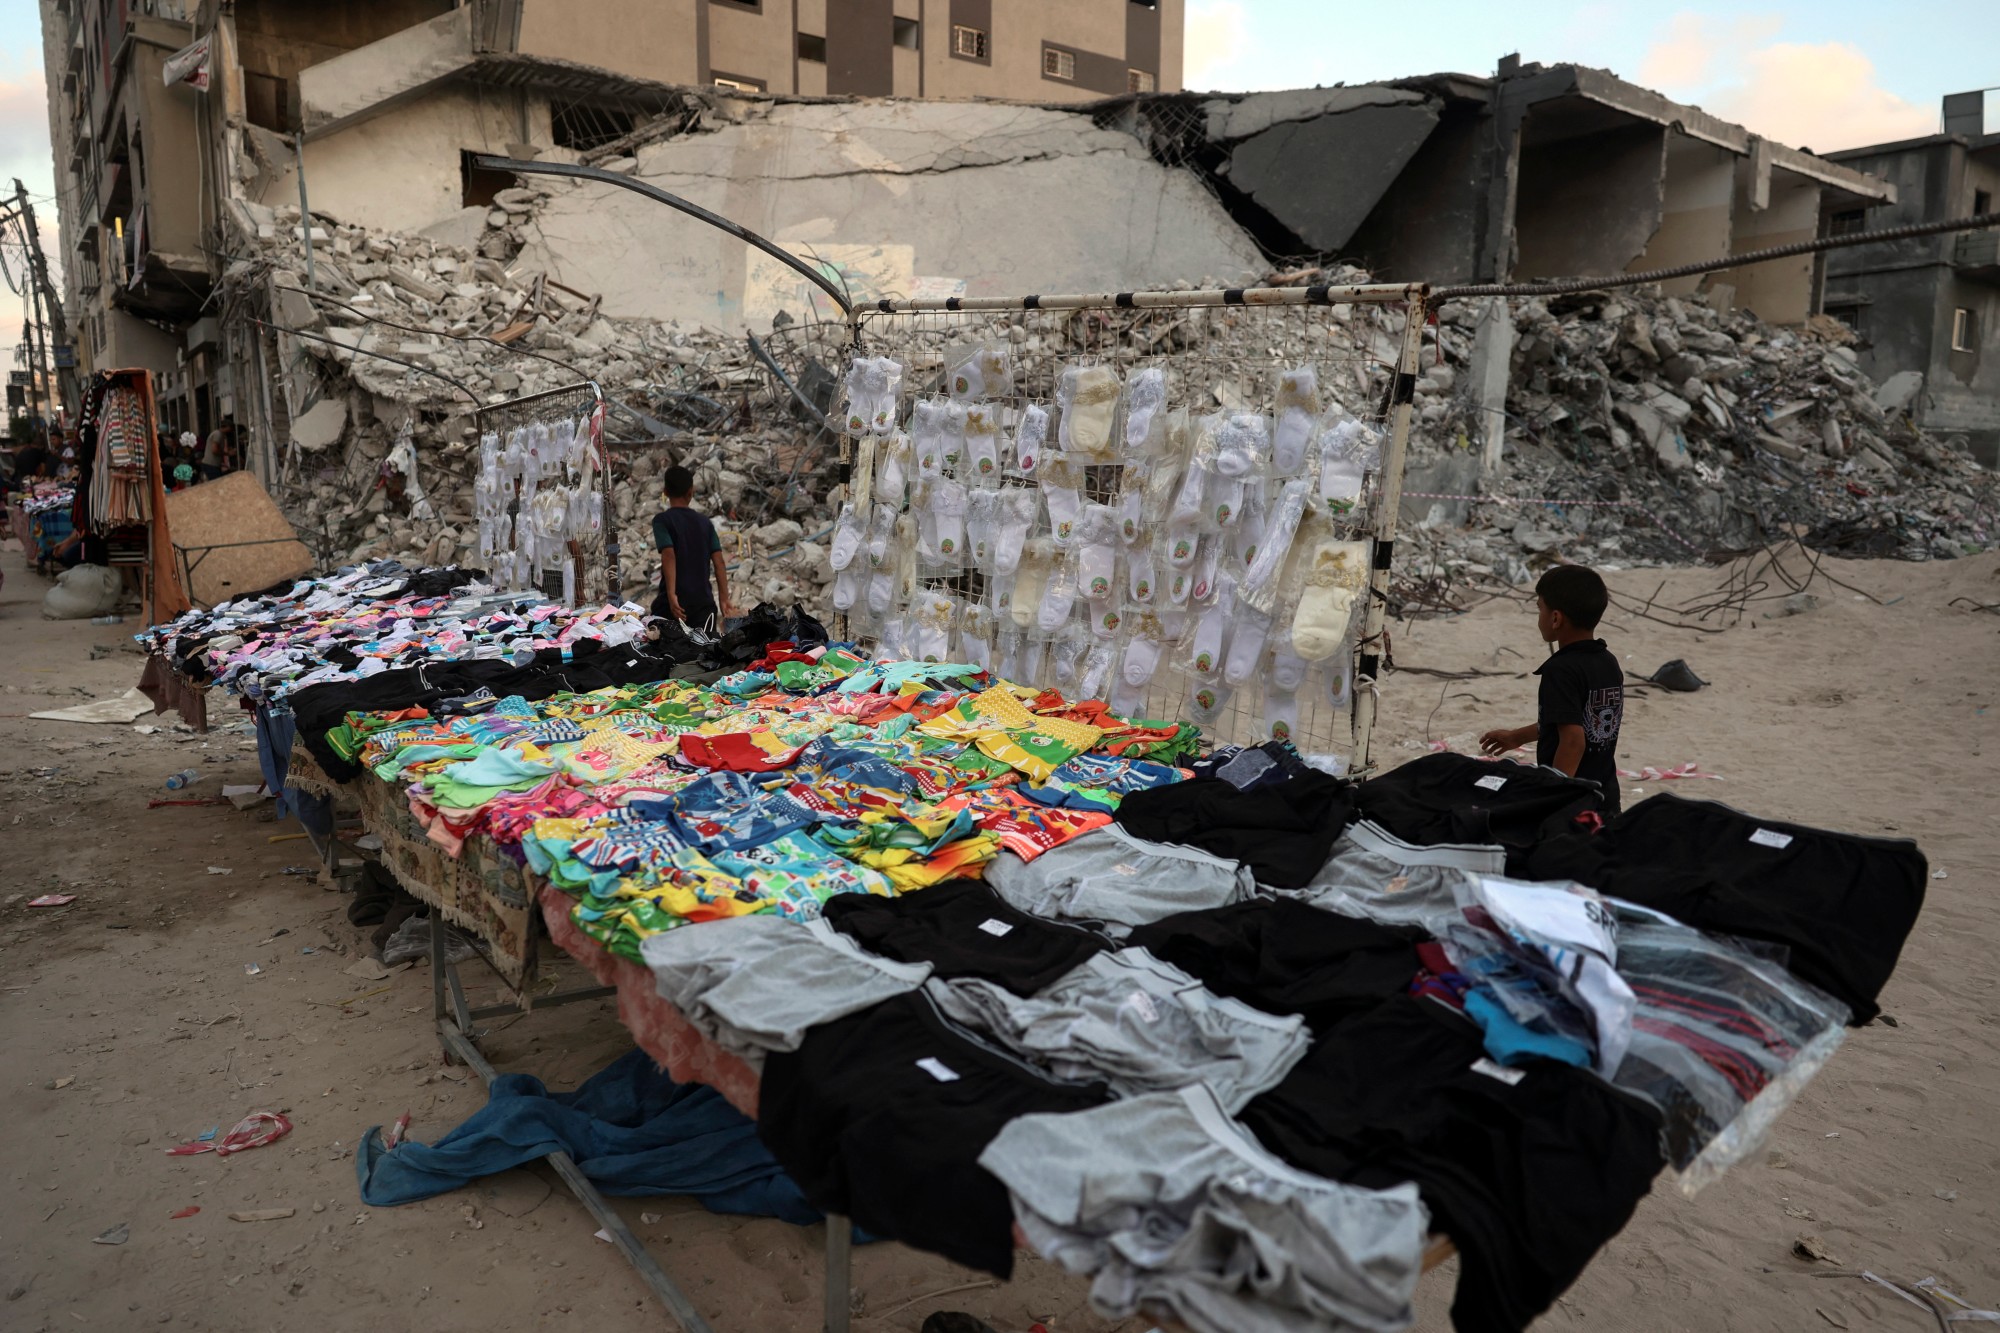 A stall sells clothes near the rubble of al-Shuruq tower, which was targeted by Israeli strikes in May, in Gaza City's al-Rimal neighbourhood on 12 July 2021(AFP)